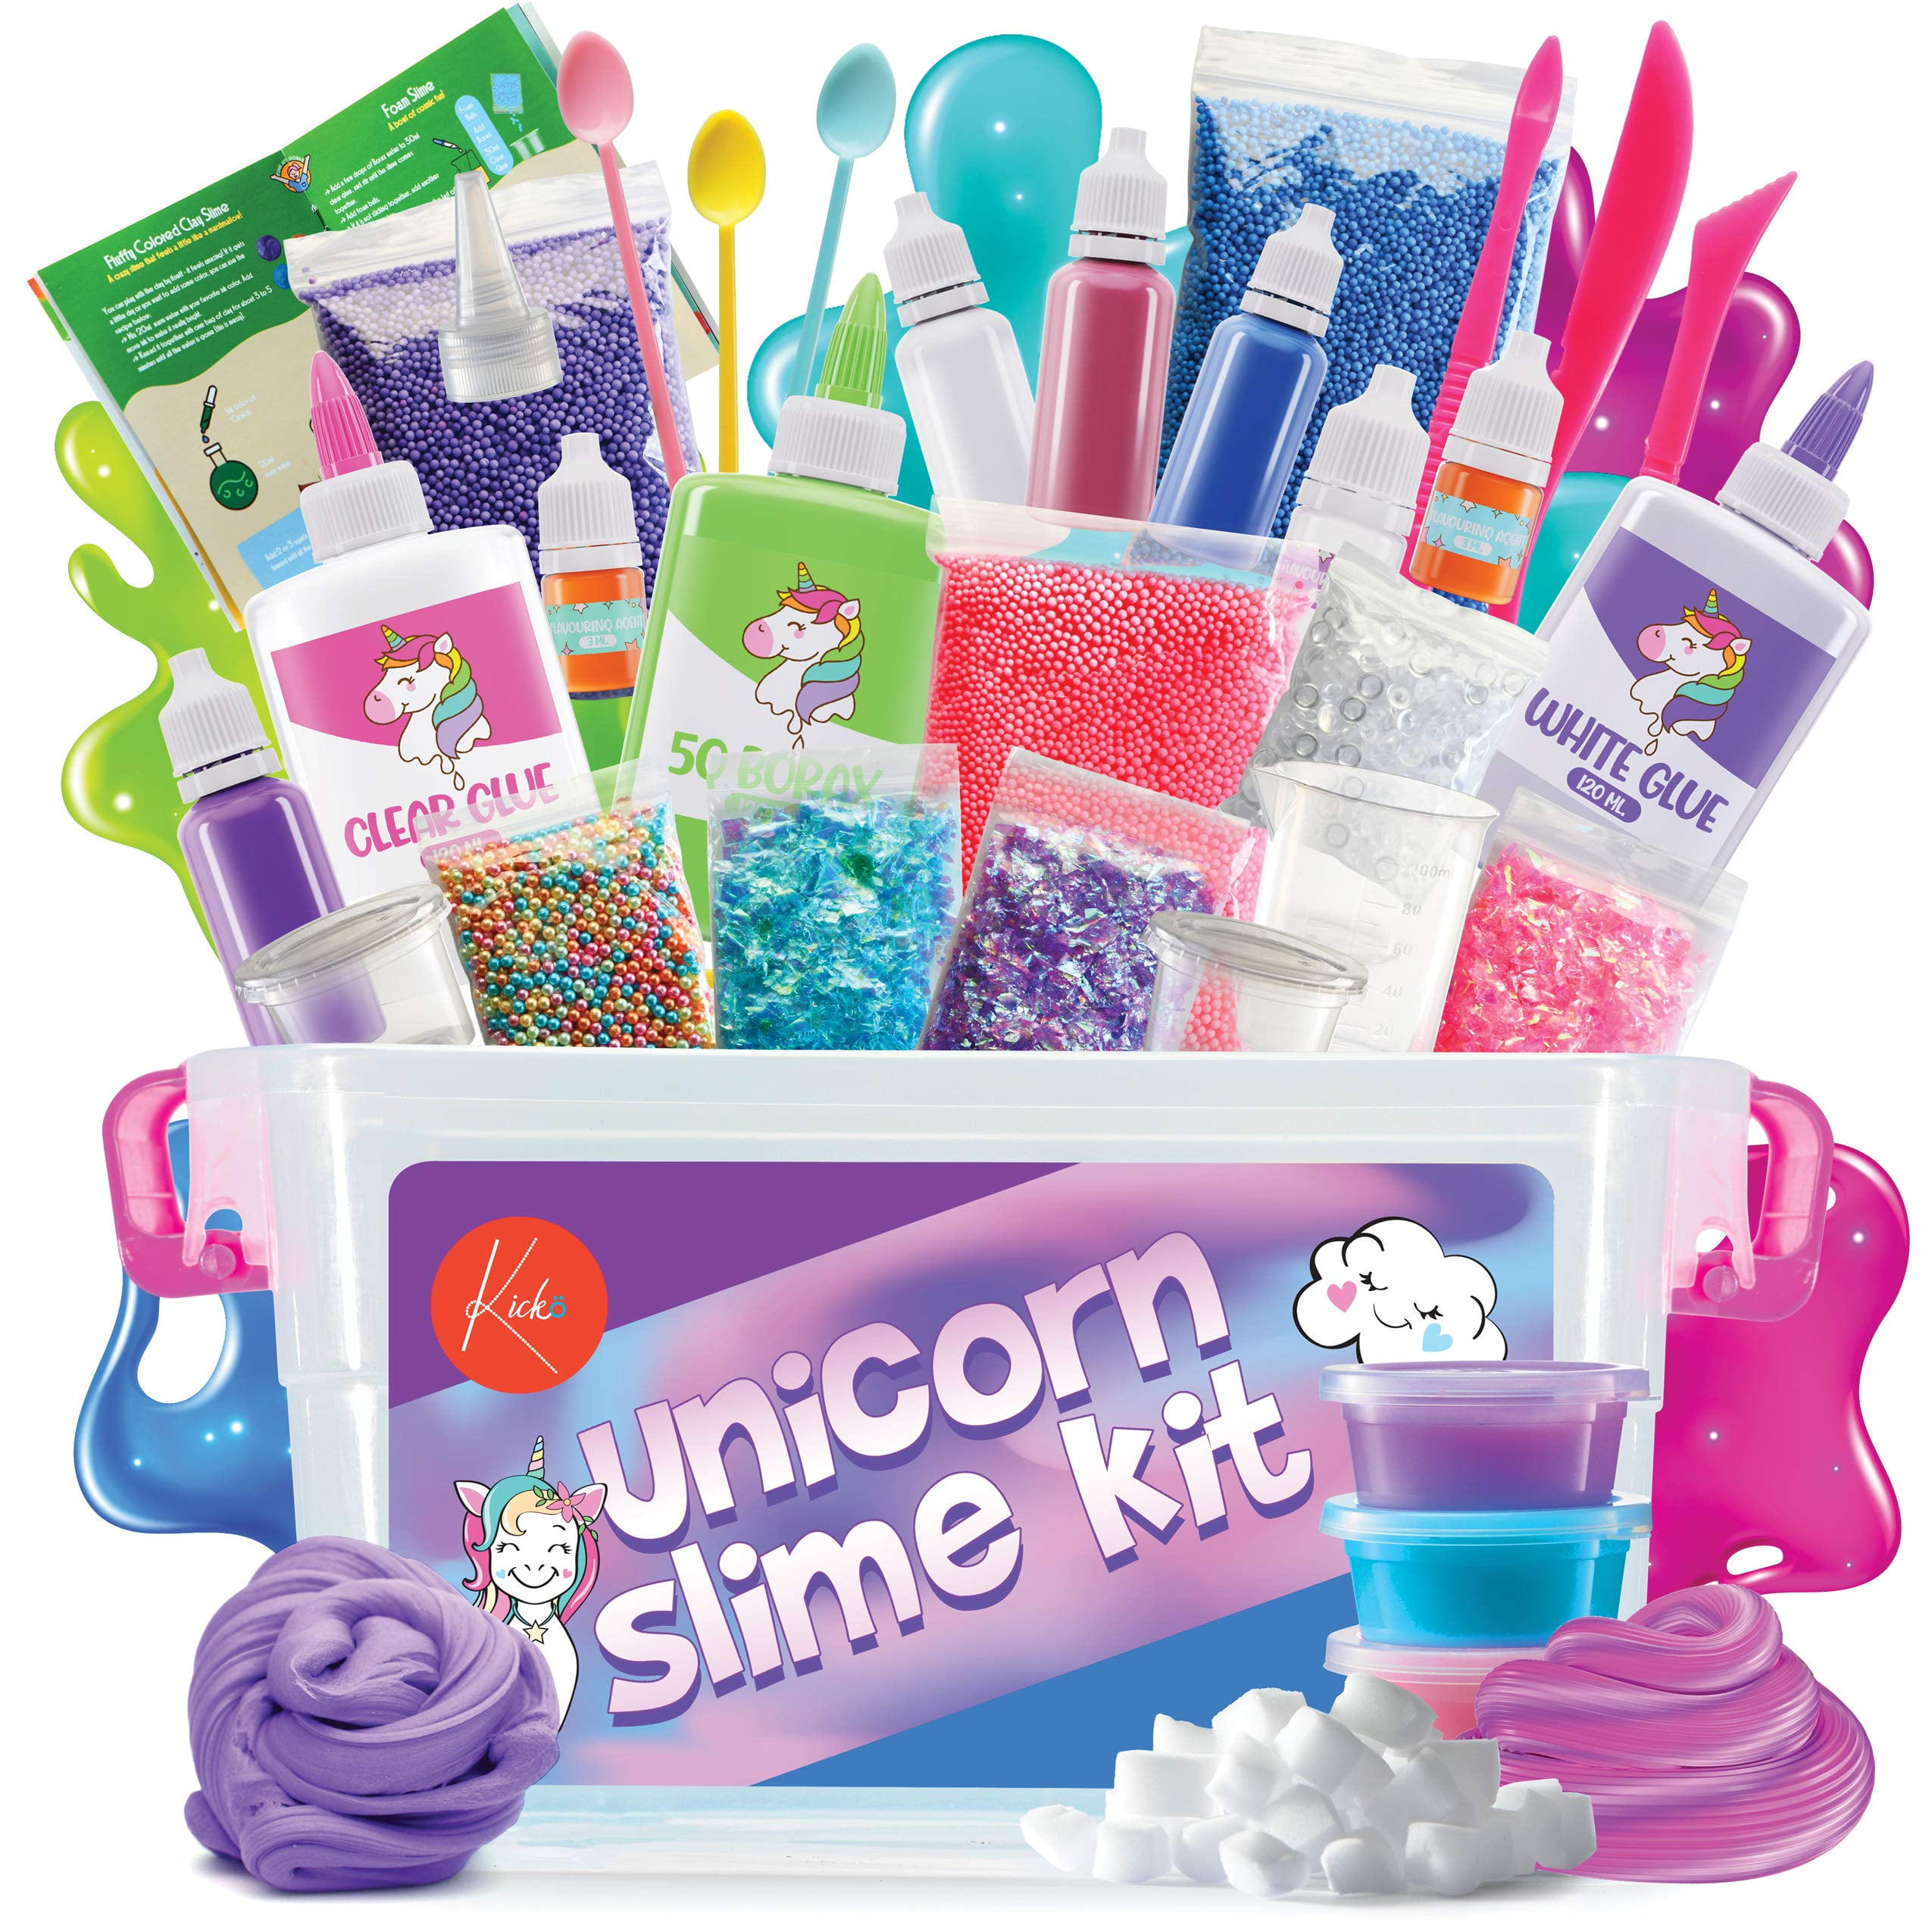 Slime 90 gram unicorn, in a pack of 12 Display for wholesale sourcing !